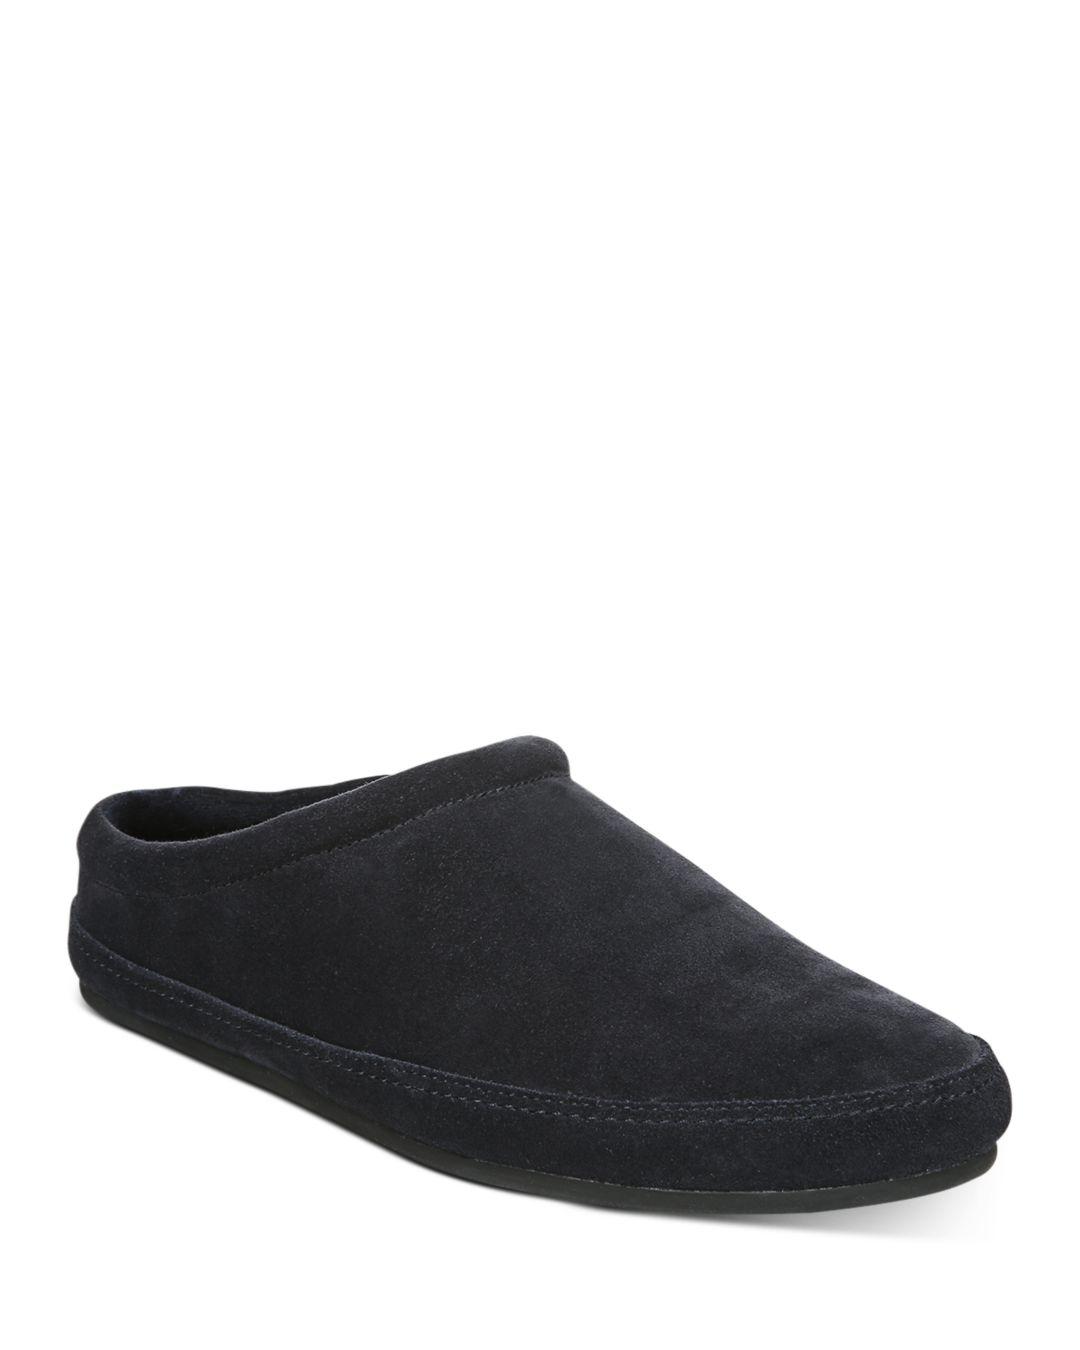 Vince Suede Men's Howell Shearling Lined Slippers in Black for Men - Lyst